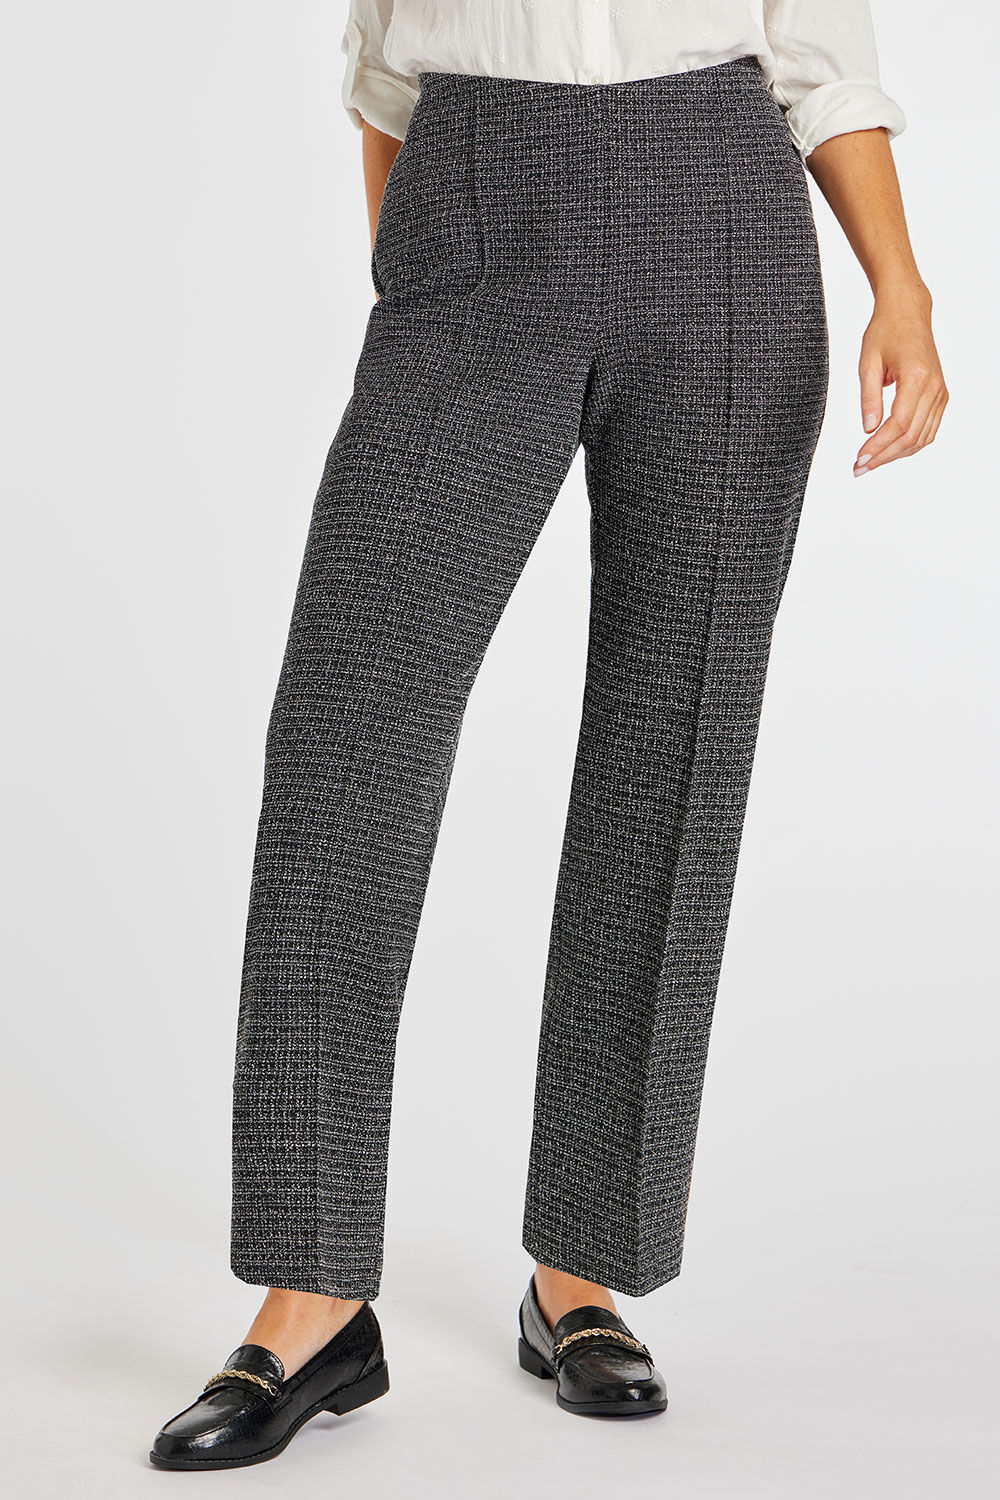 Bonmarche Dark Grey Checked Jacquard Pleated Front Elasticated Trousers